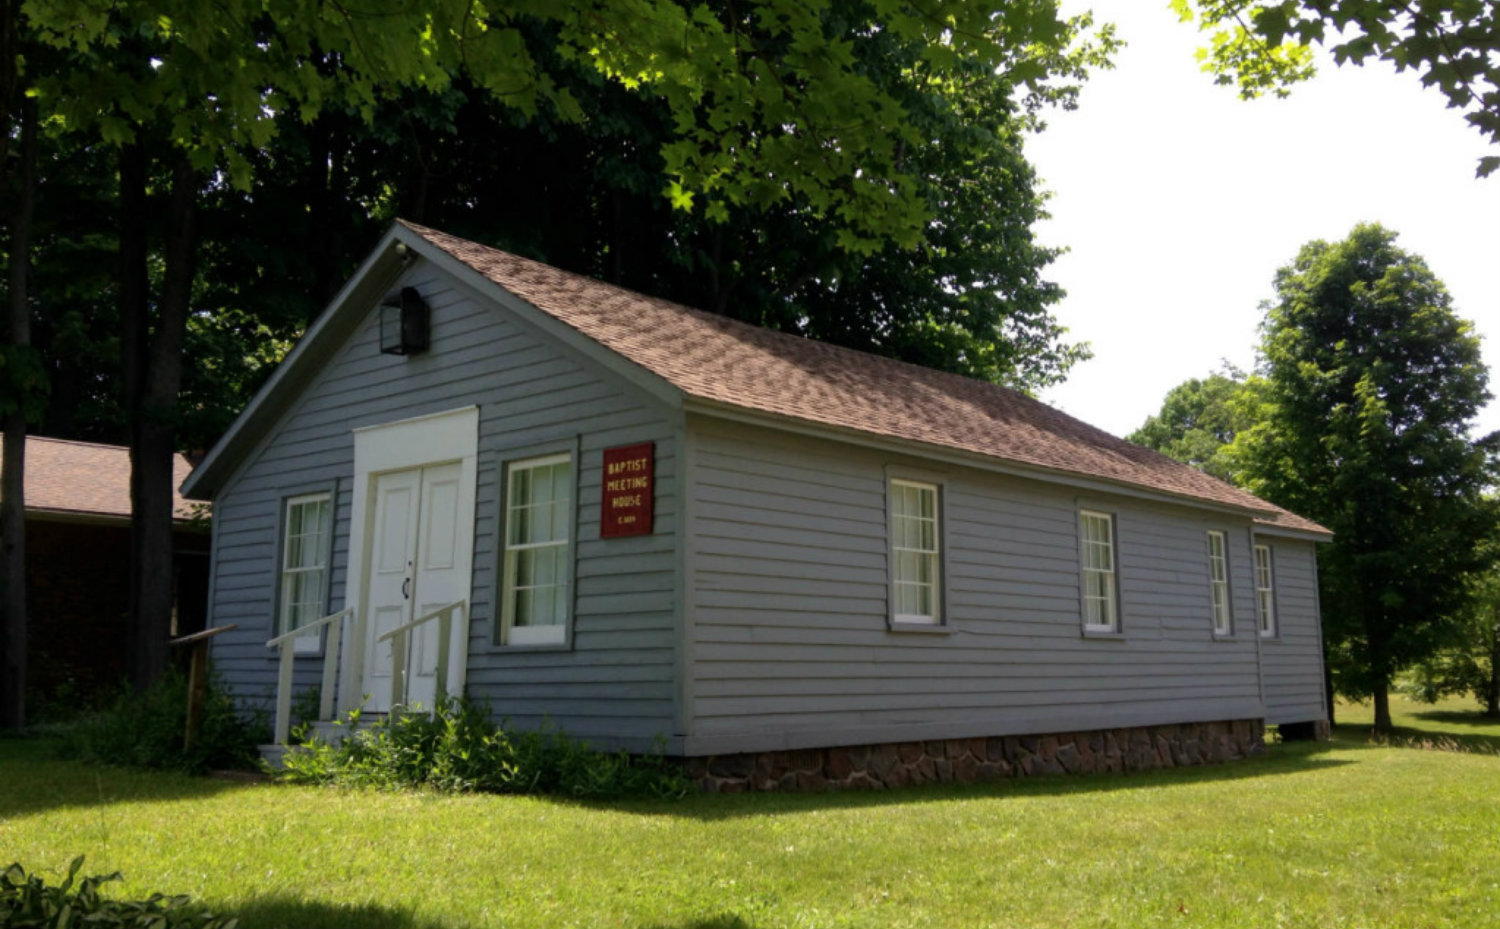 Baptist Meeting House at Heritage Square Museum – Ontario, NY